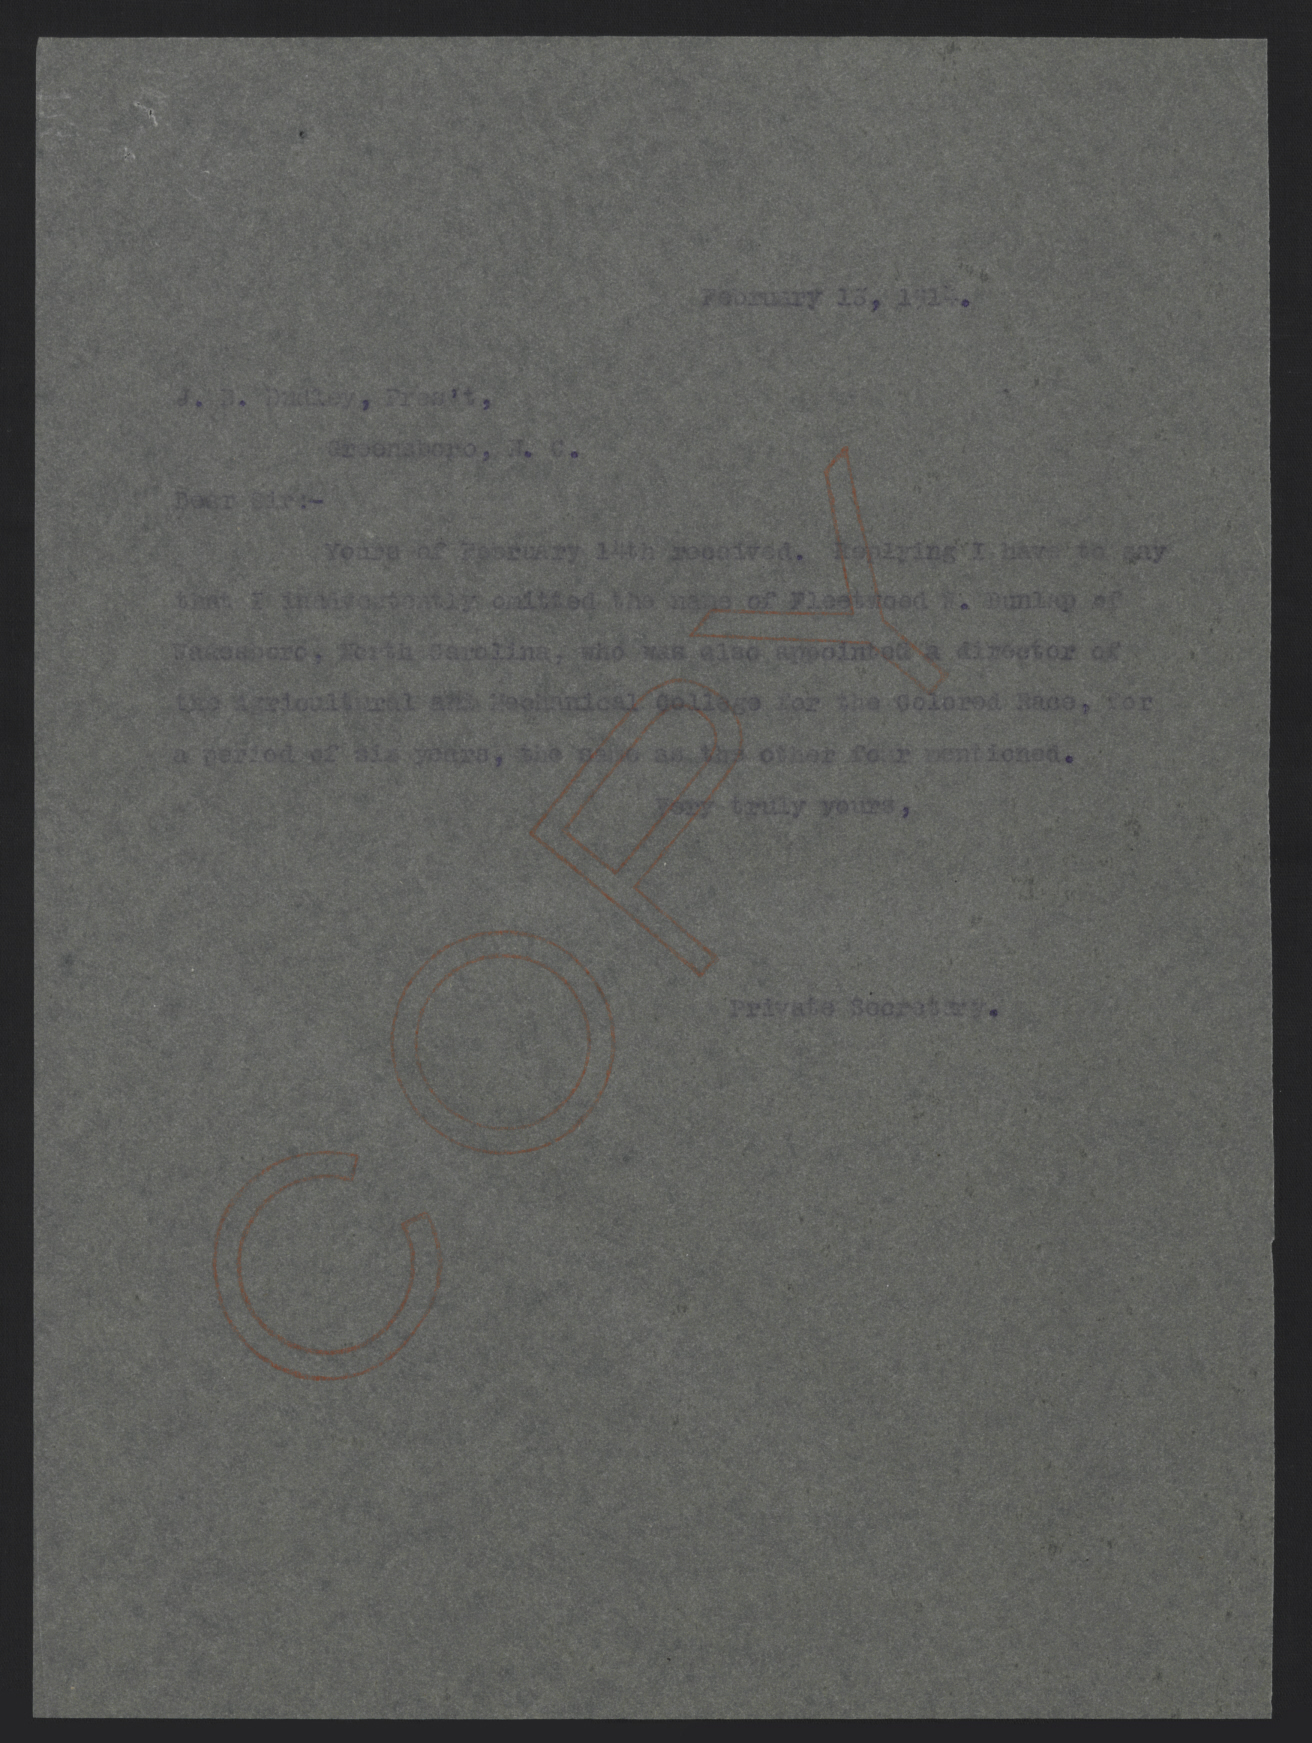 Letter from Kerr to Dudley, February 13, 1914